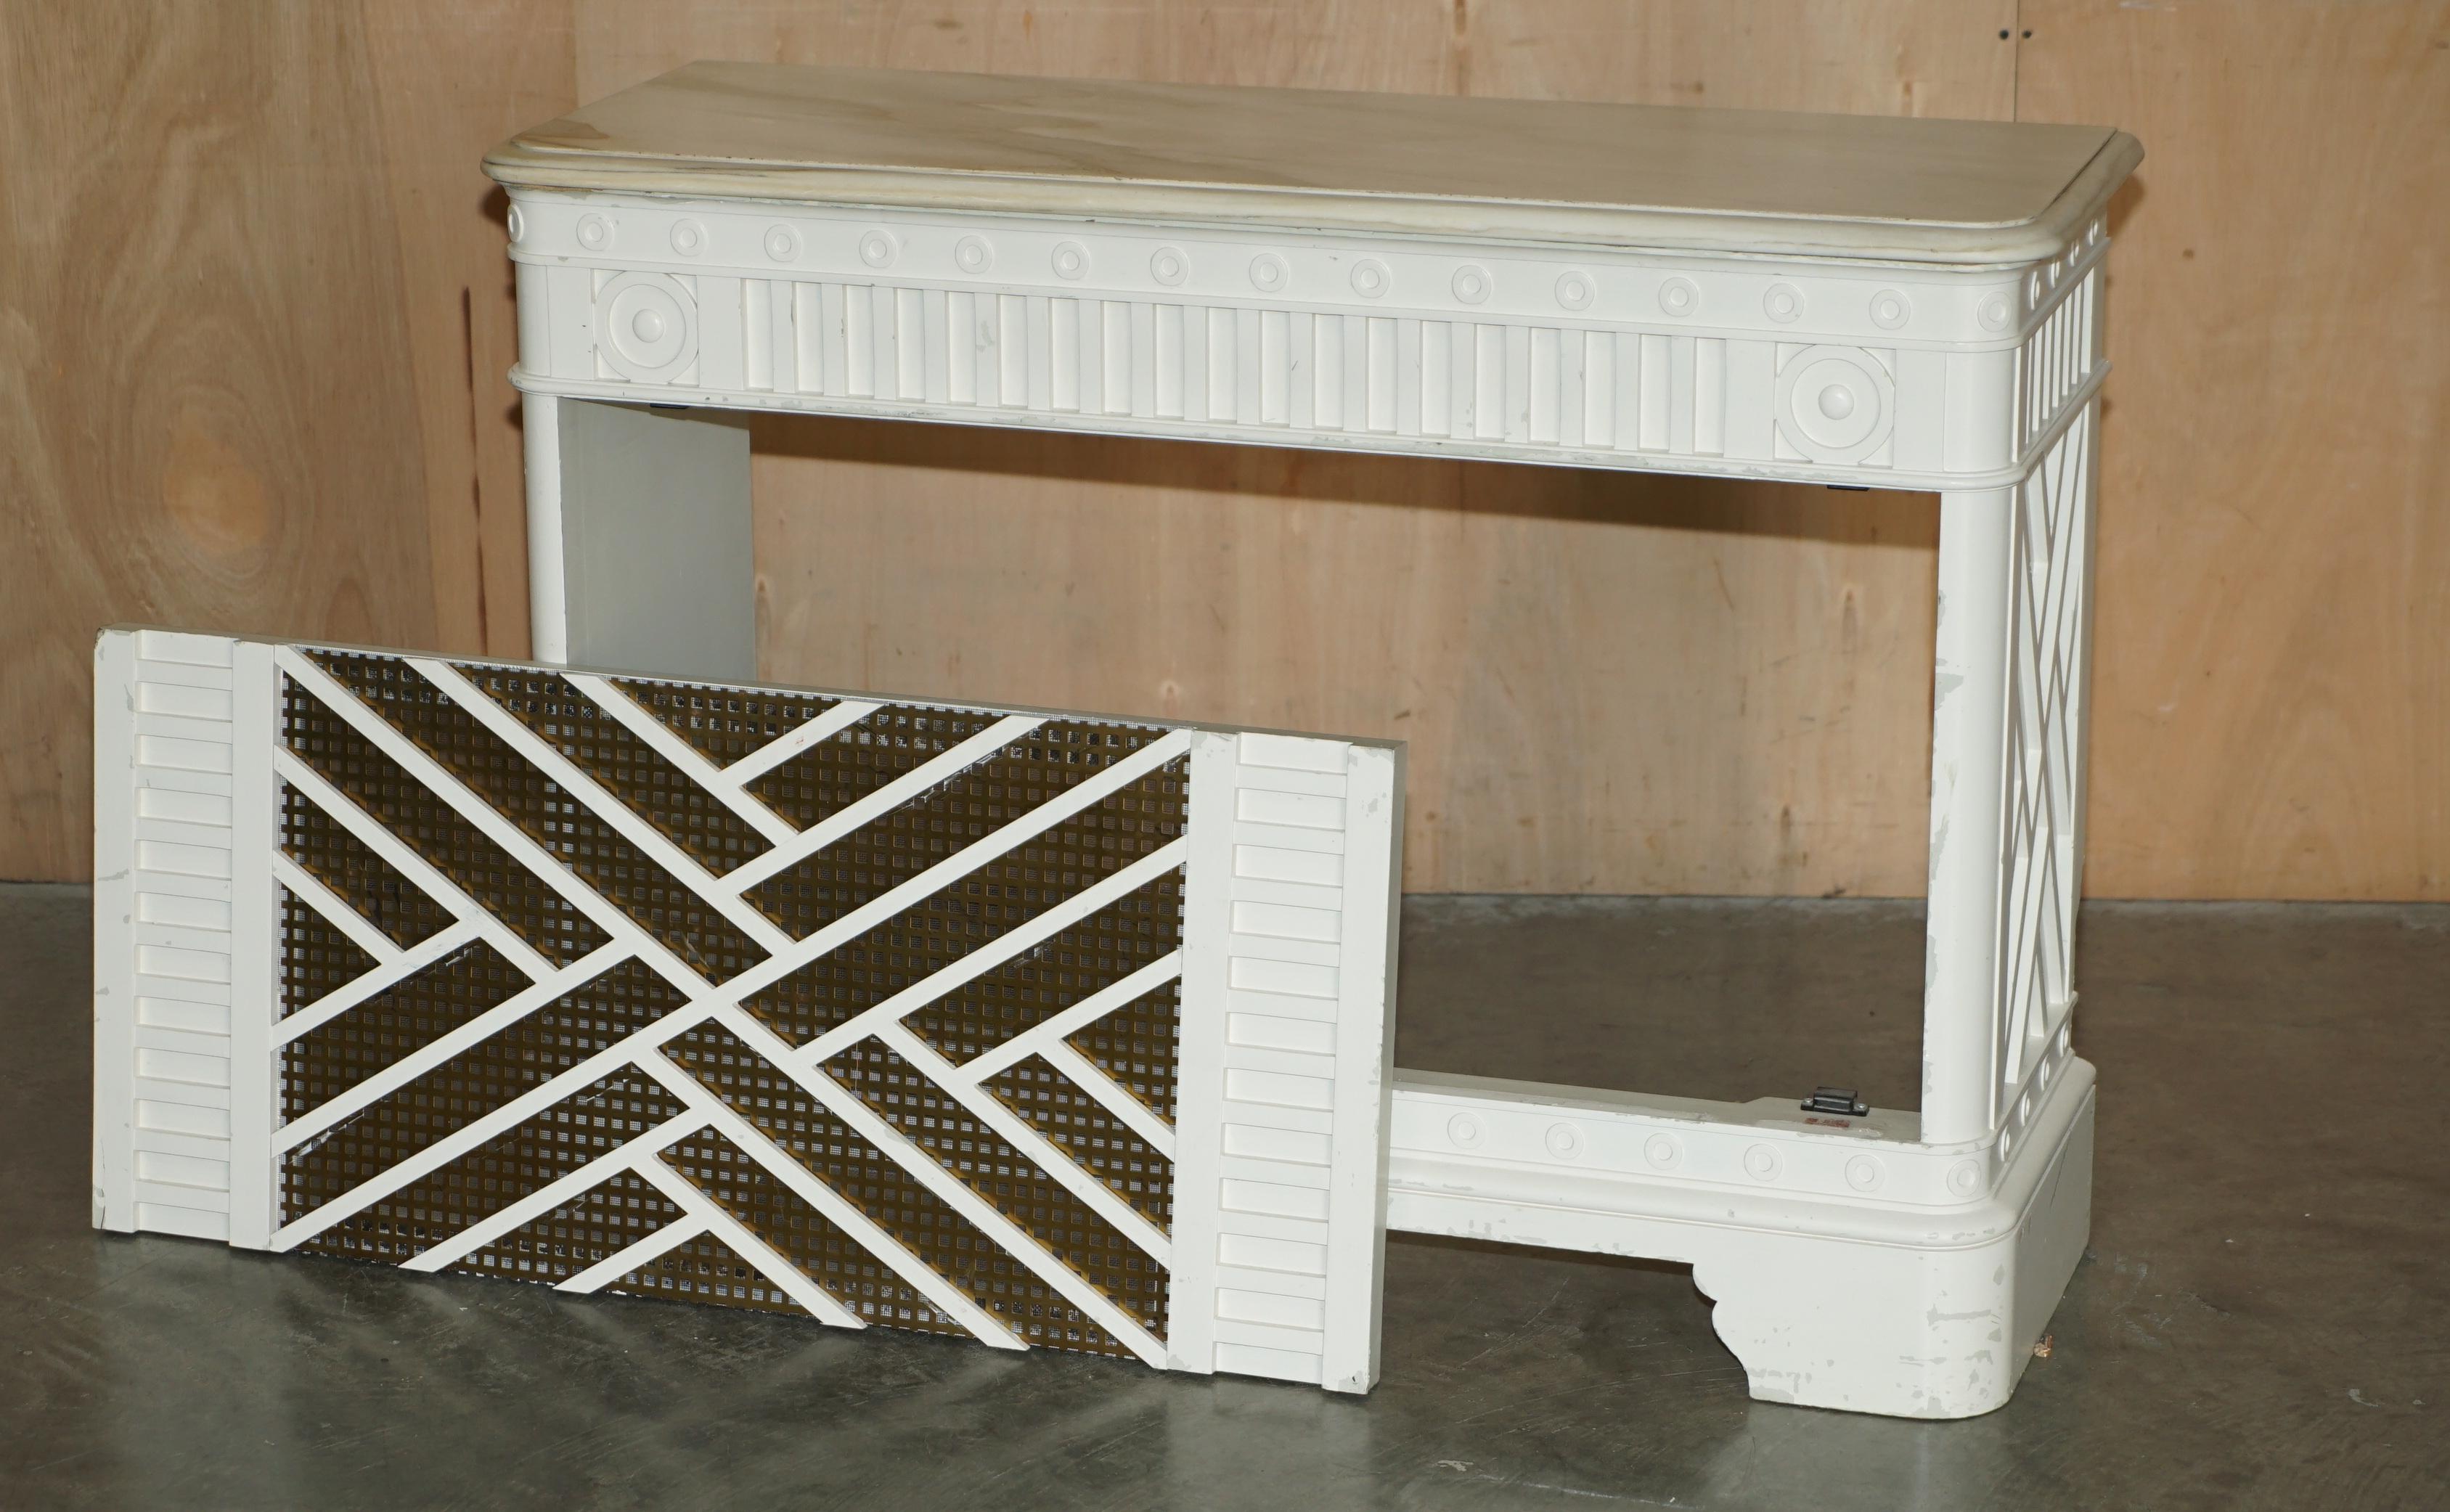 PAIR OF ViNTAGE ITALIAN CARRARA MARBLE TOPPED RADIATOR COVERS REMOVABLE FRONTS For Sale 5